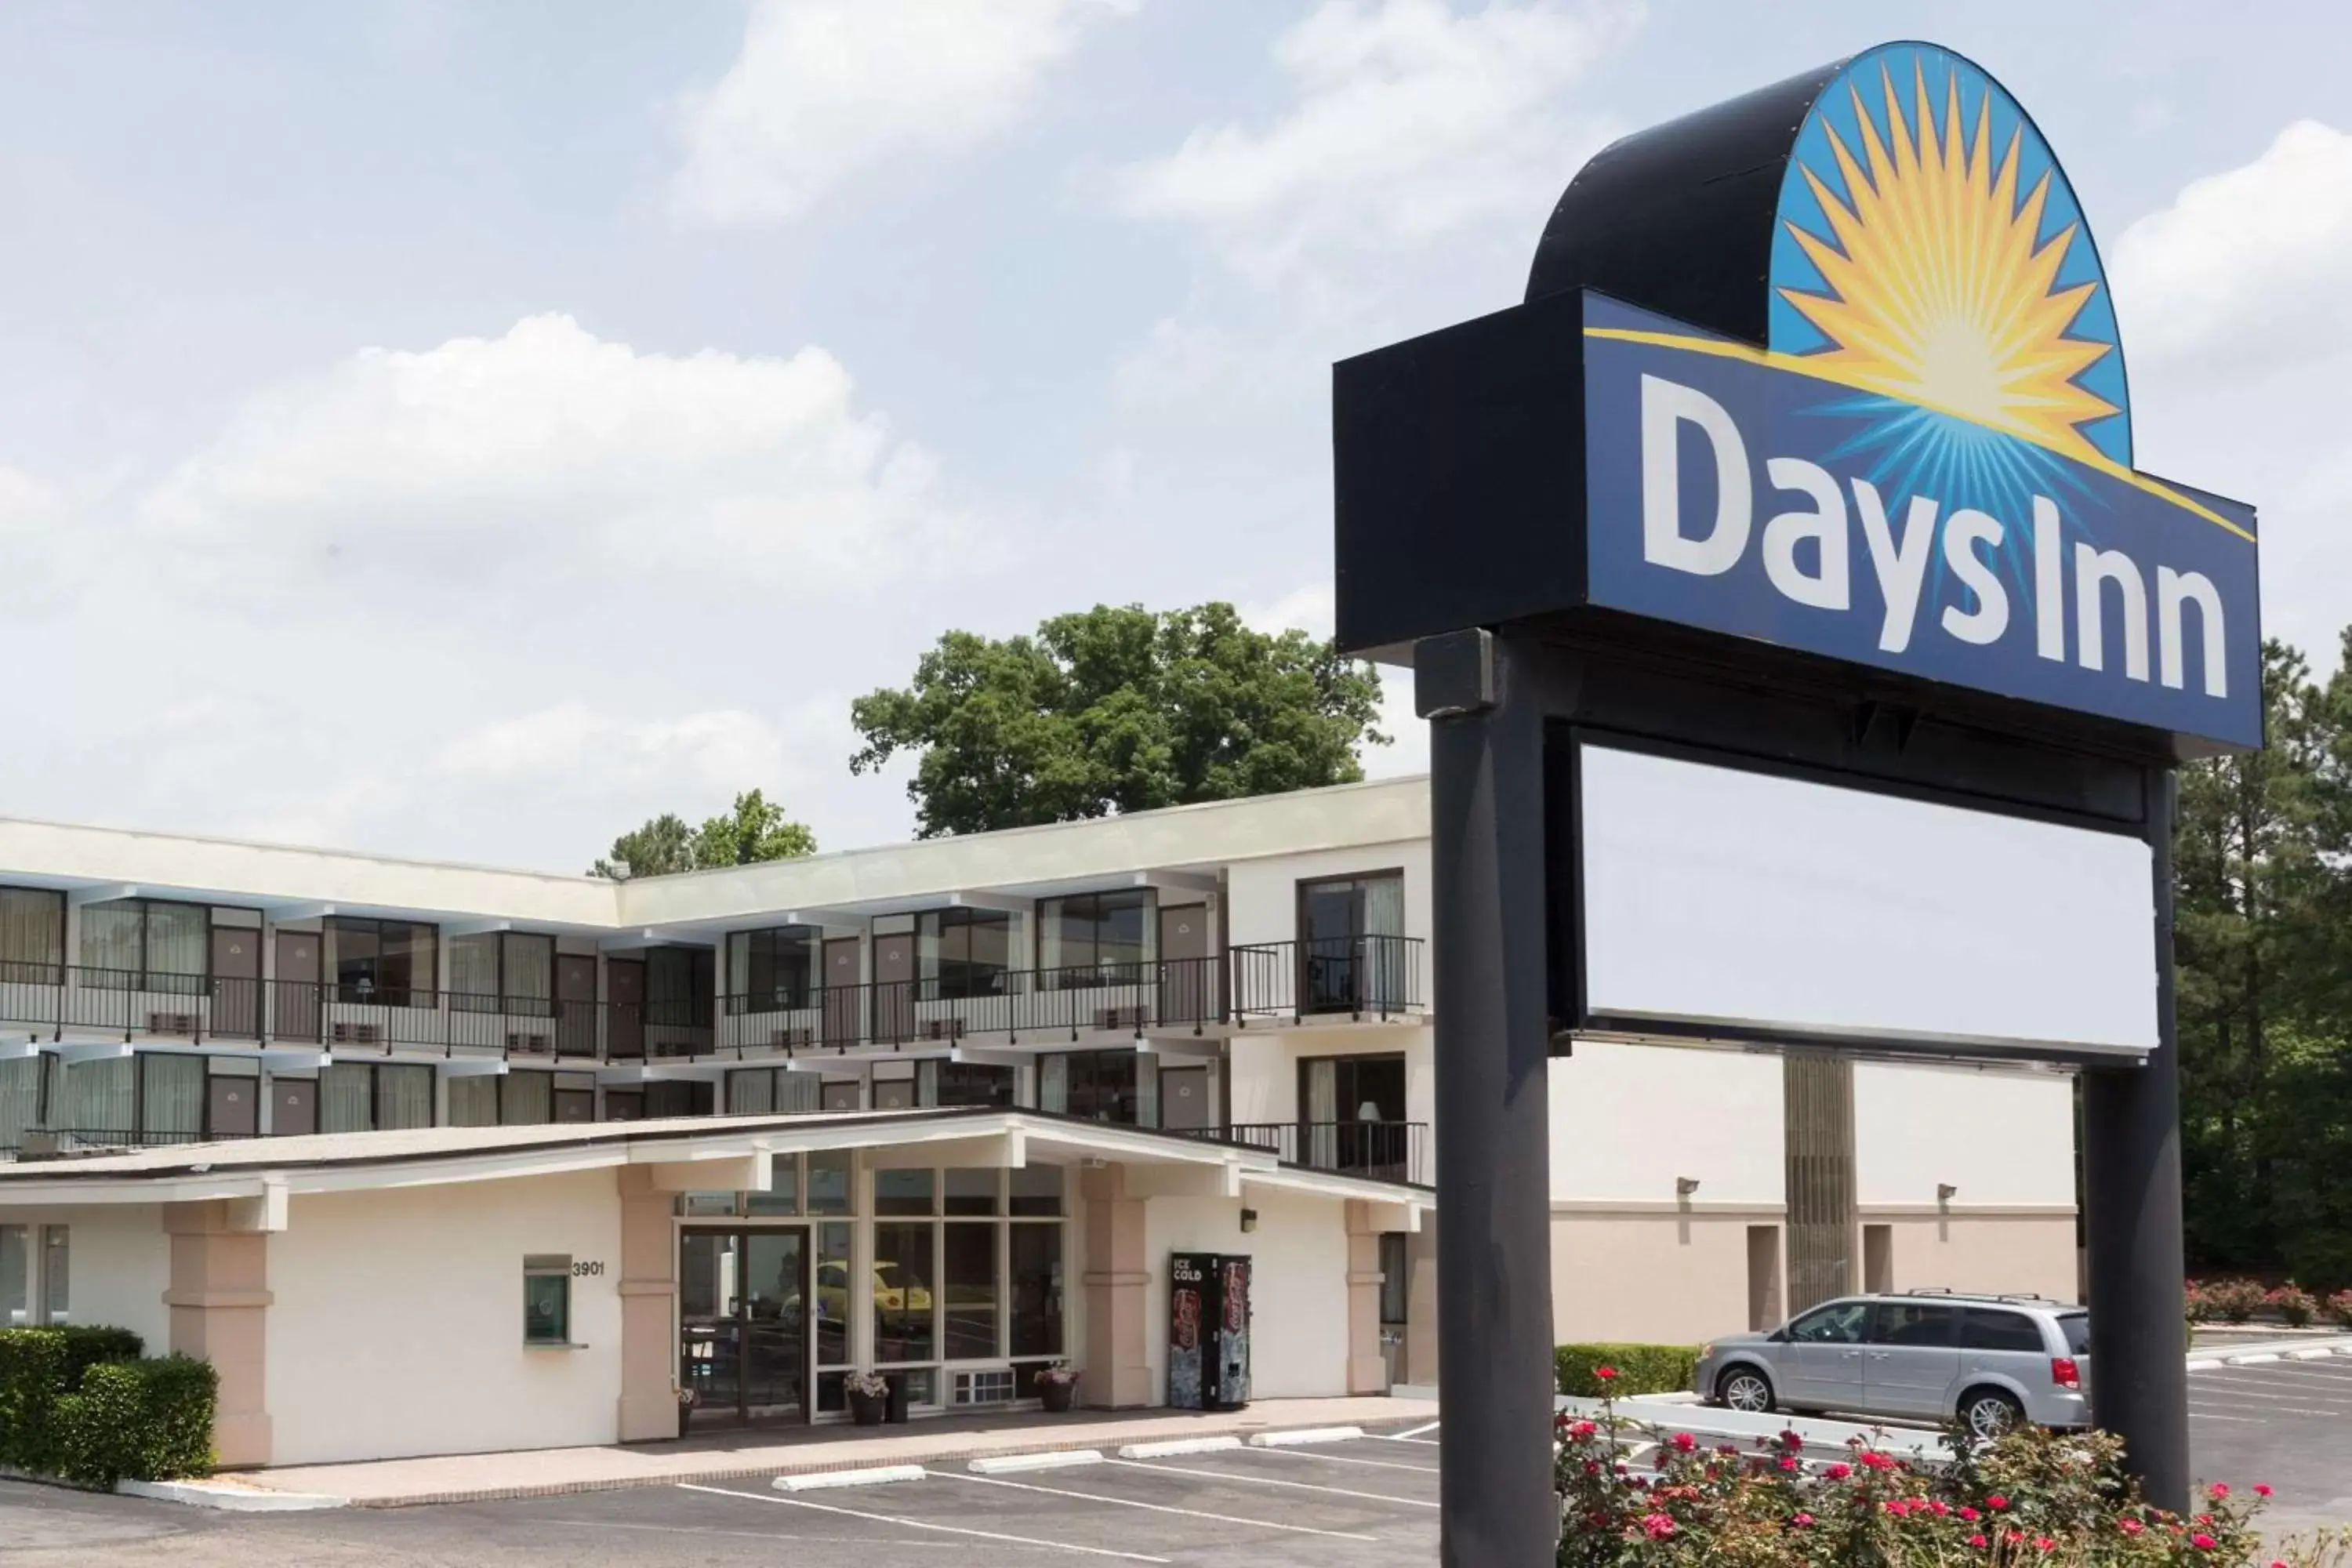 Property building in Days Inn by Wyndham Raleigh South